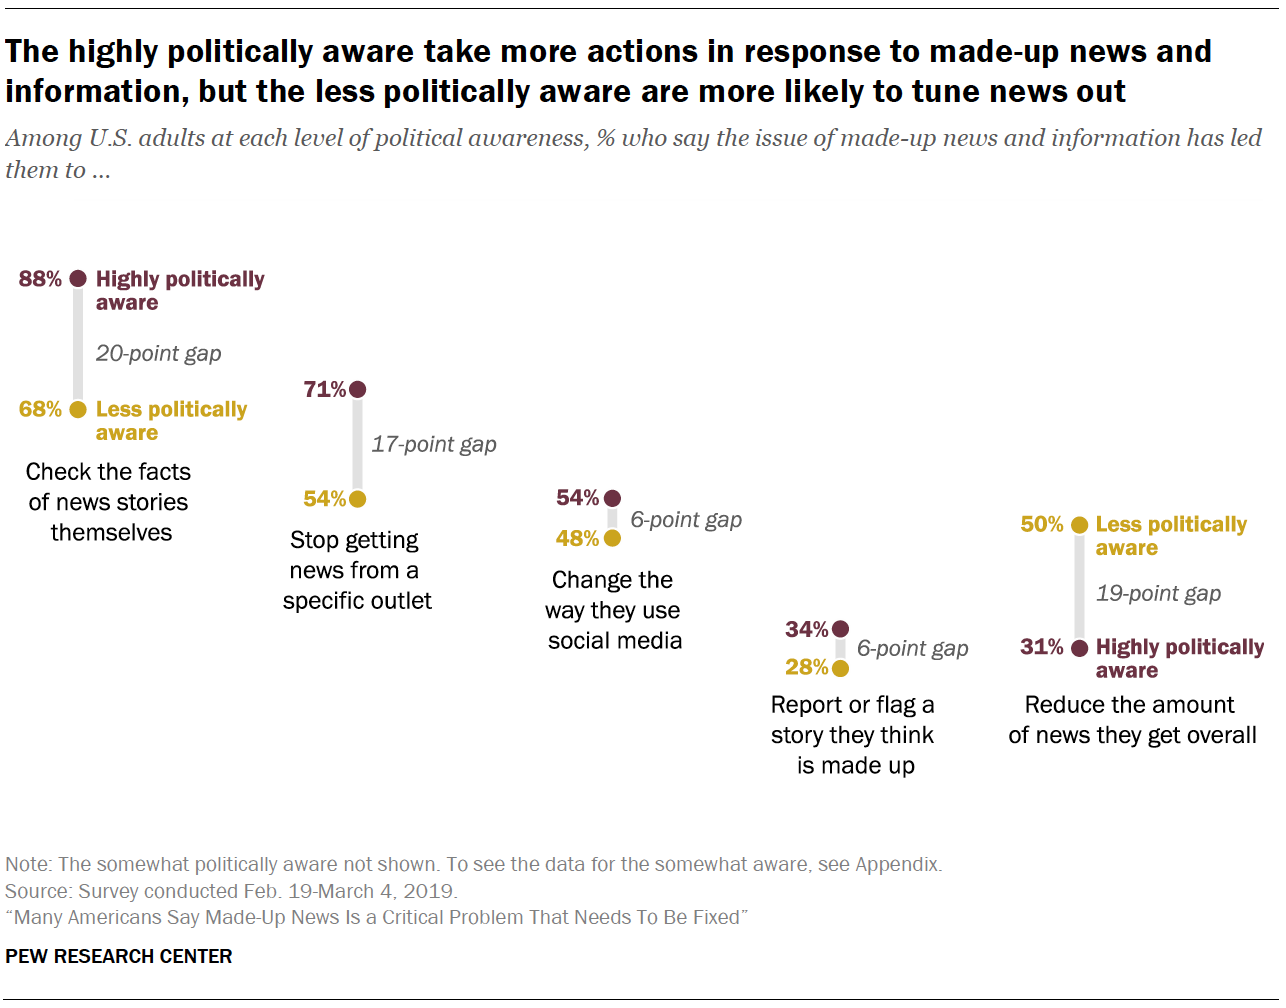 A chart showing The highly politically aware take more actions in response to made-up news and information, but the less politically aware are more likely to tune news out